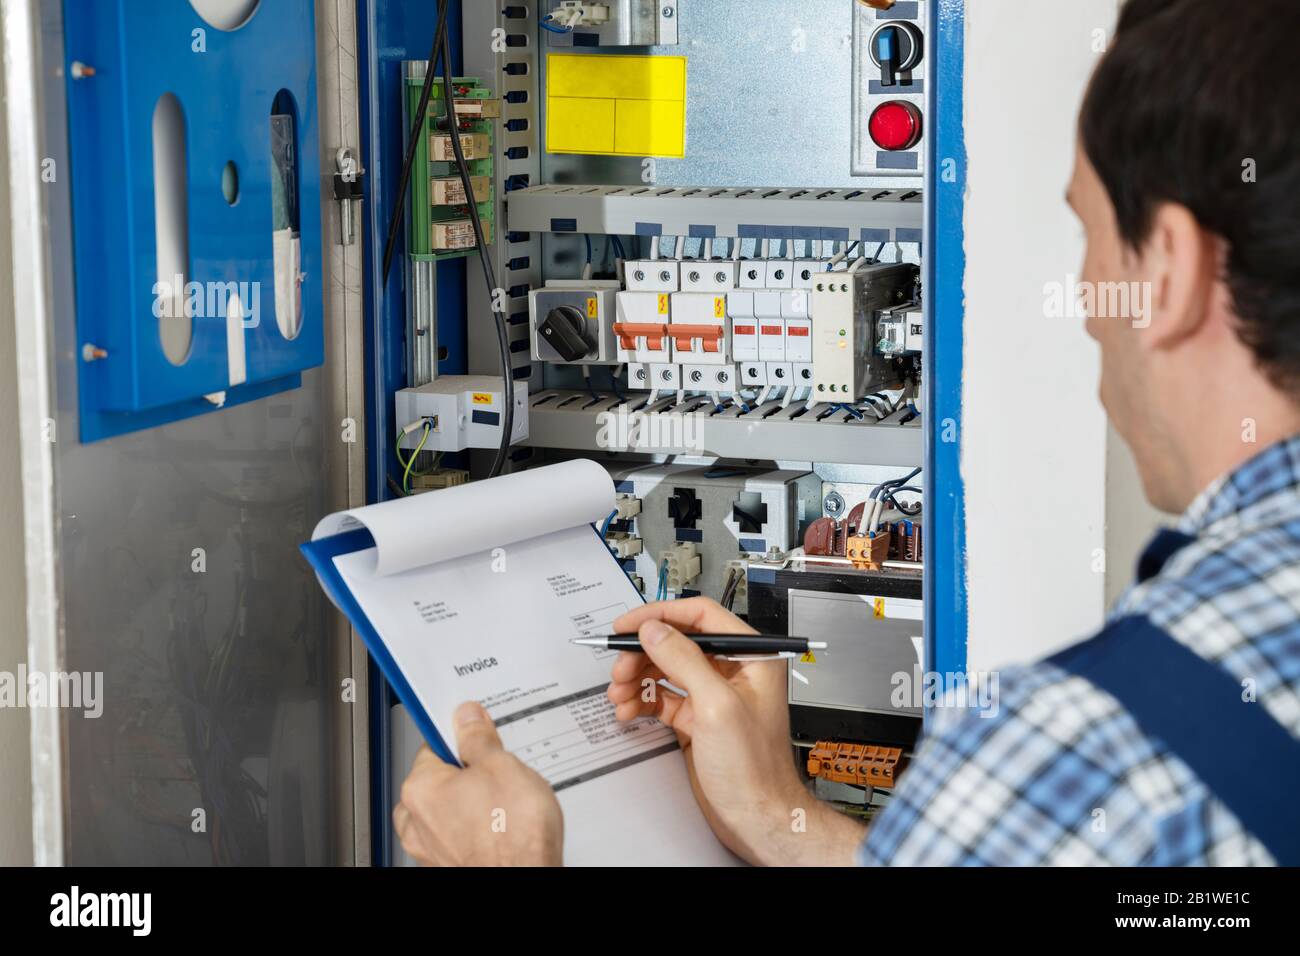 Cropped Image Of Male Electrician Holding Clipboard While Examining Fusebox Stock Photo